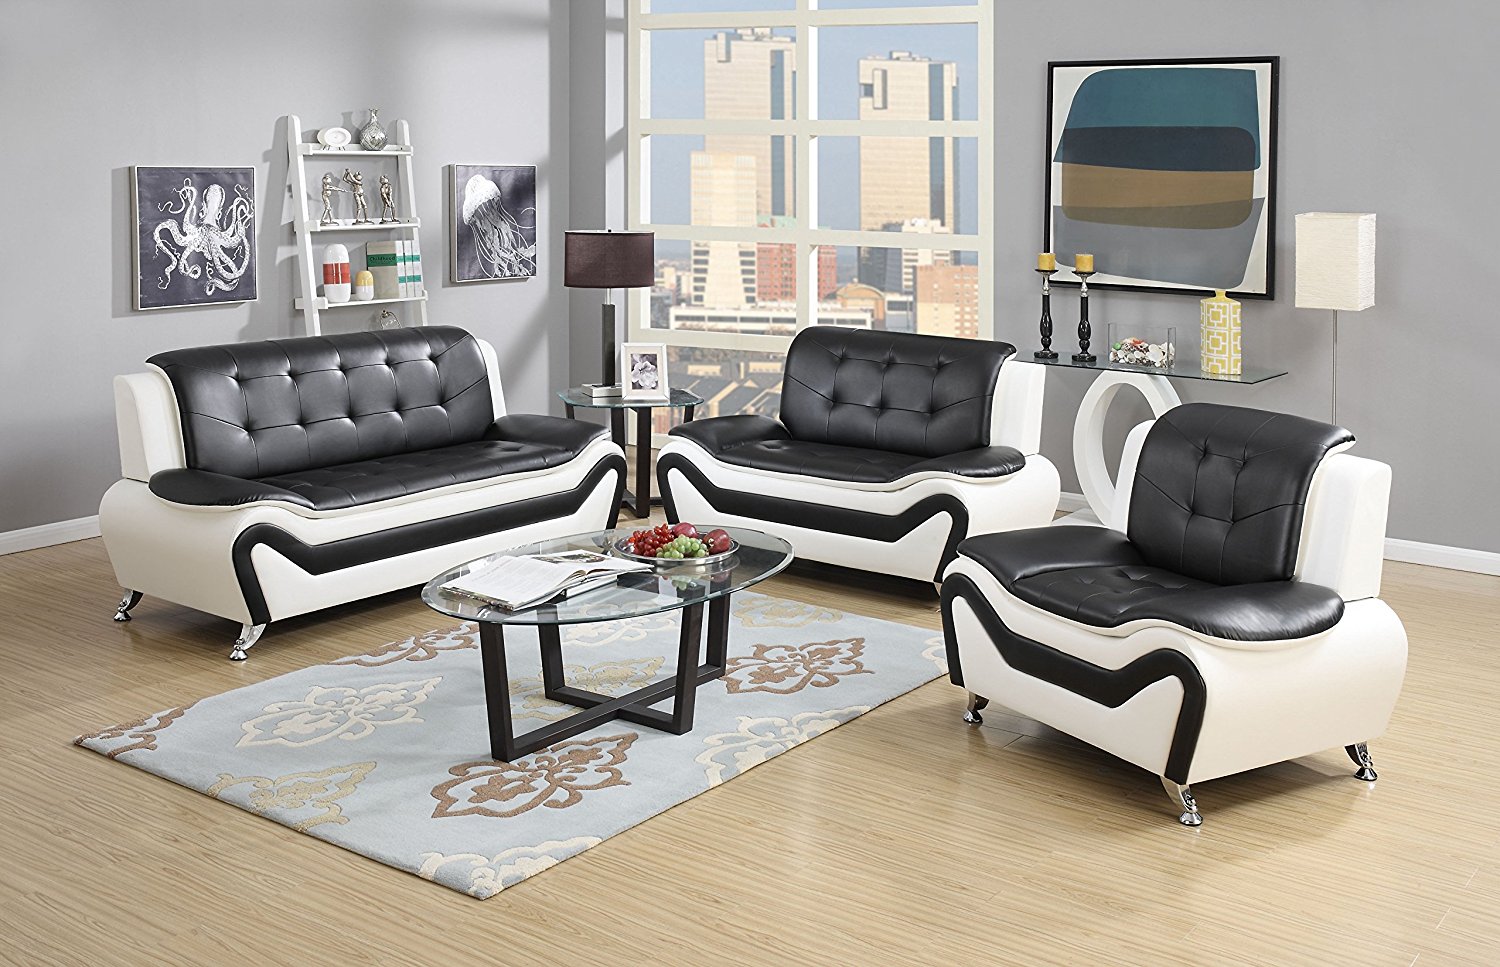 US Pride Furniture 3 Piece Modern Bonded Leather Sofa Set with Sofa, Loveseat, and Chair, White/Black